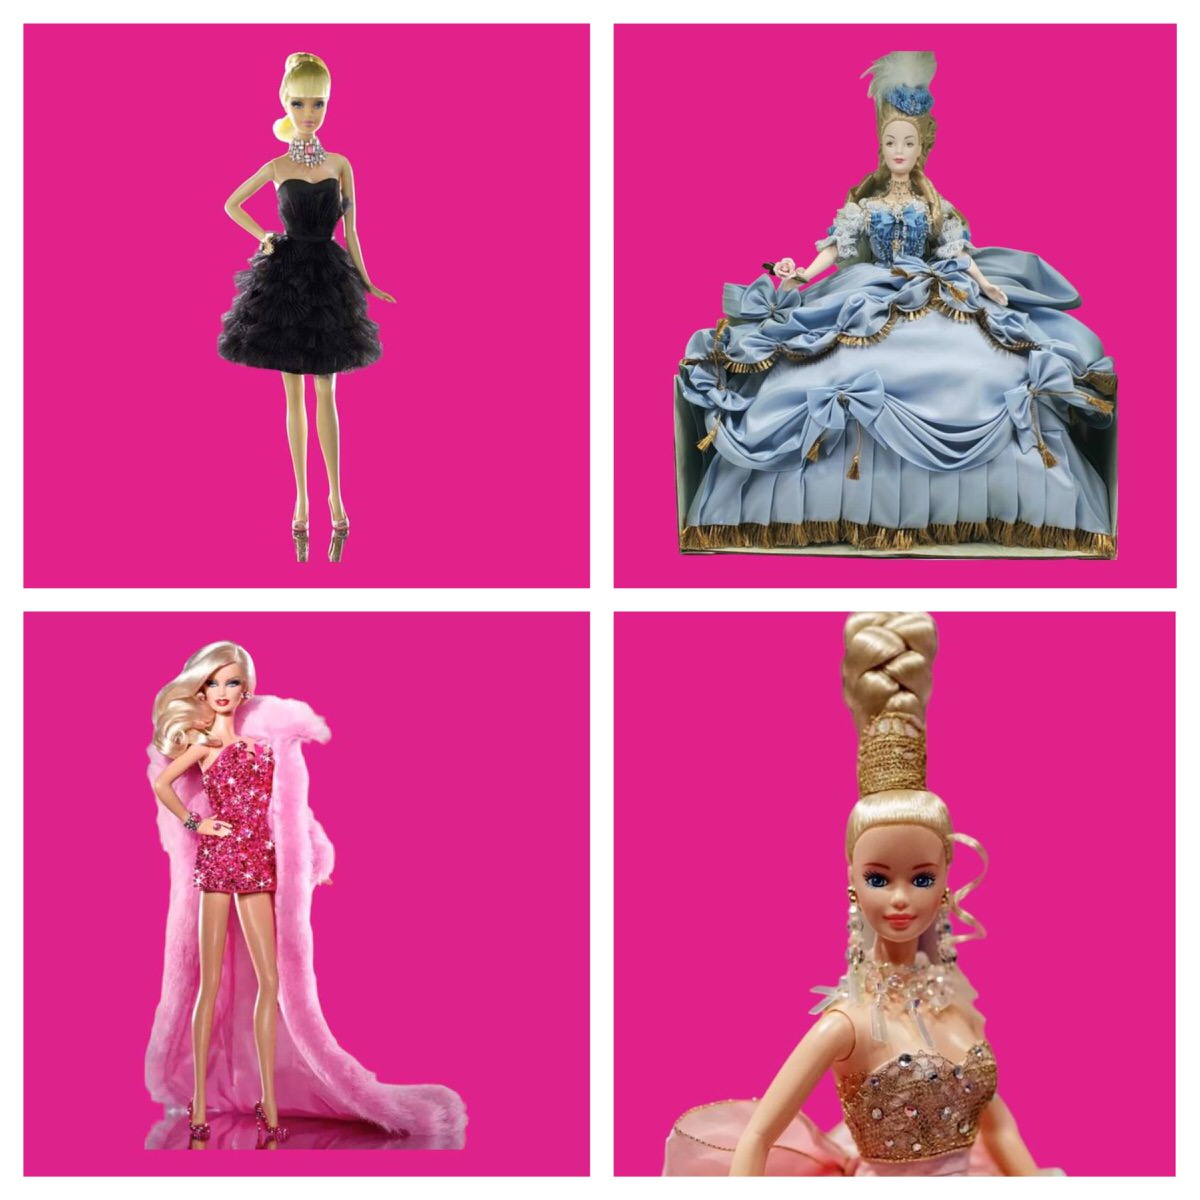 Priceless Barbies: The Most Expensive Dolls Ever Made